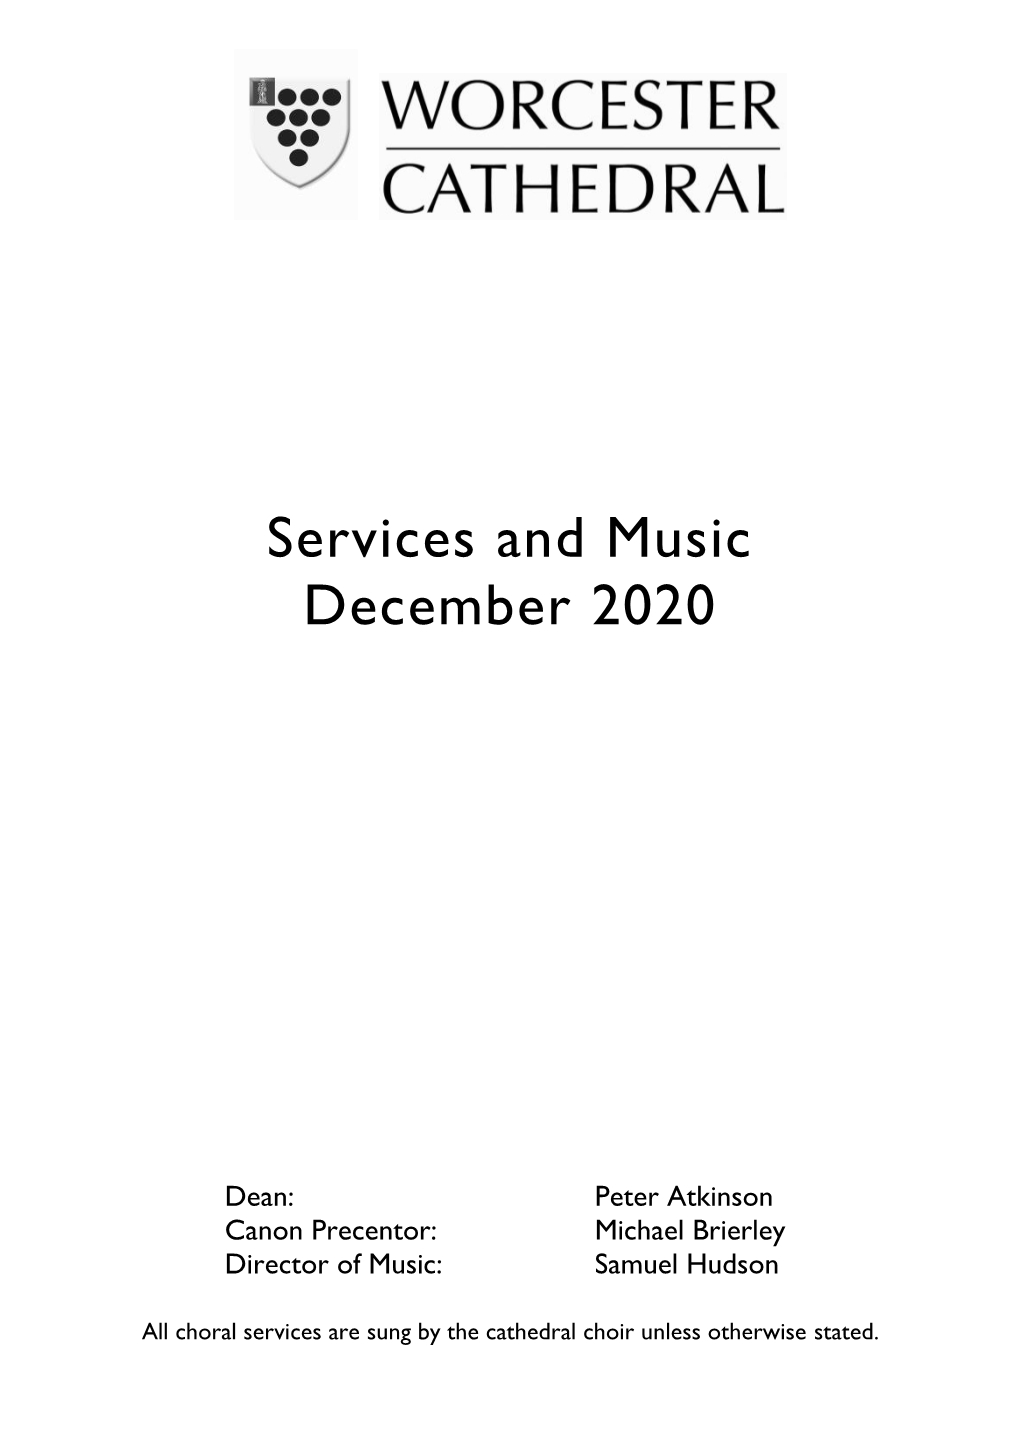 Services and Music December 2020